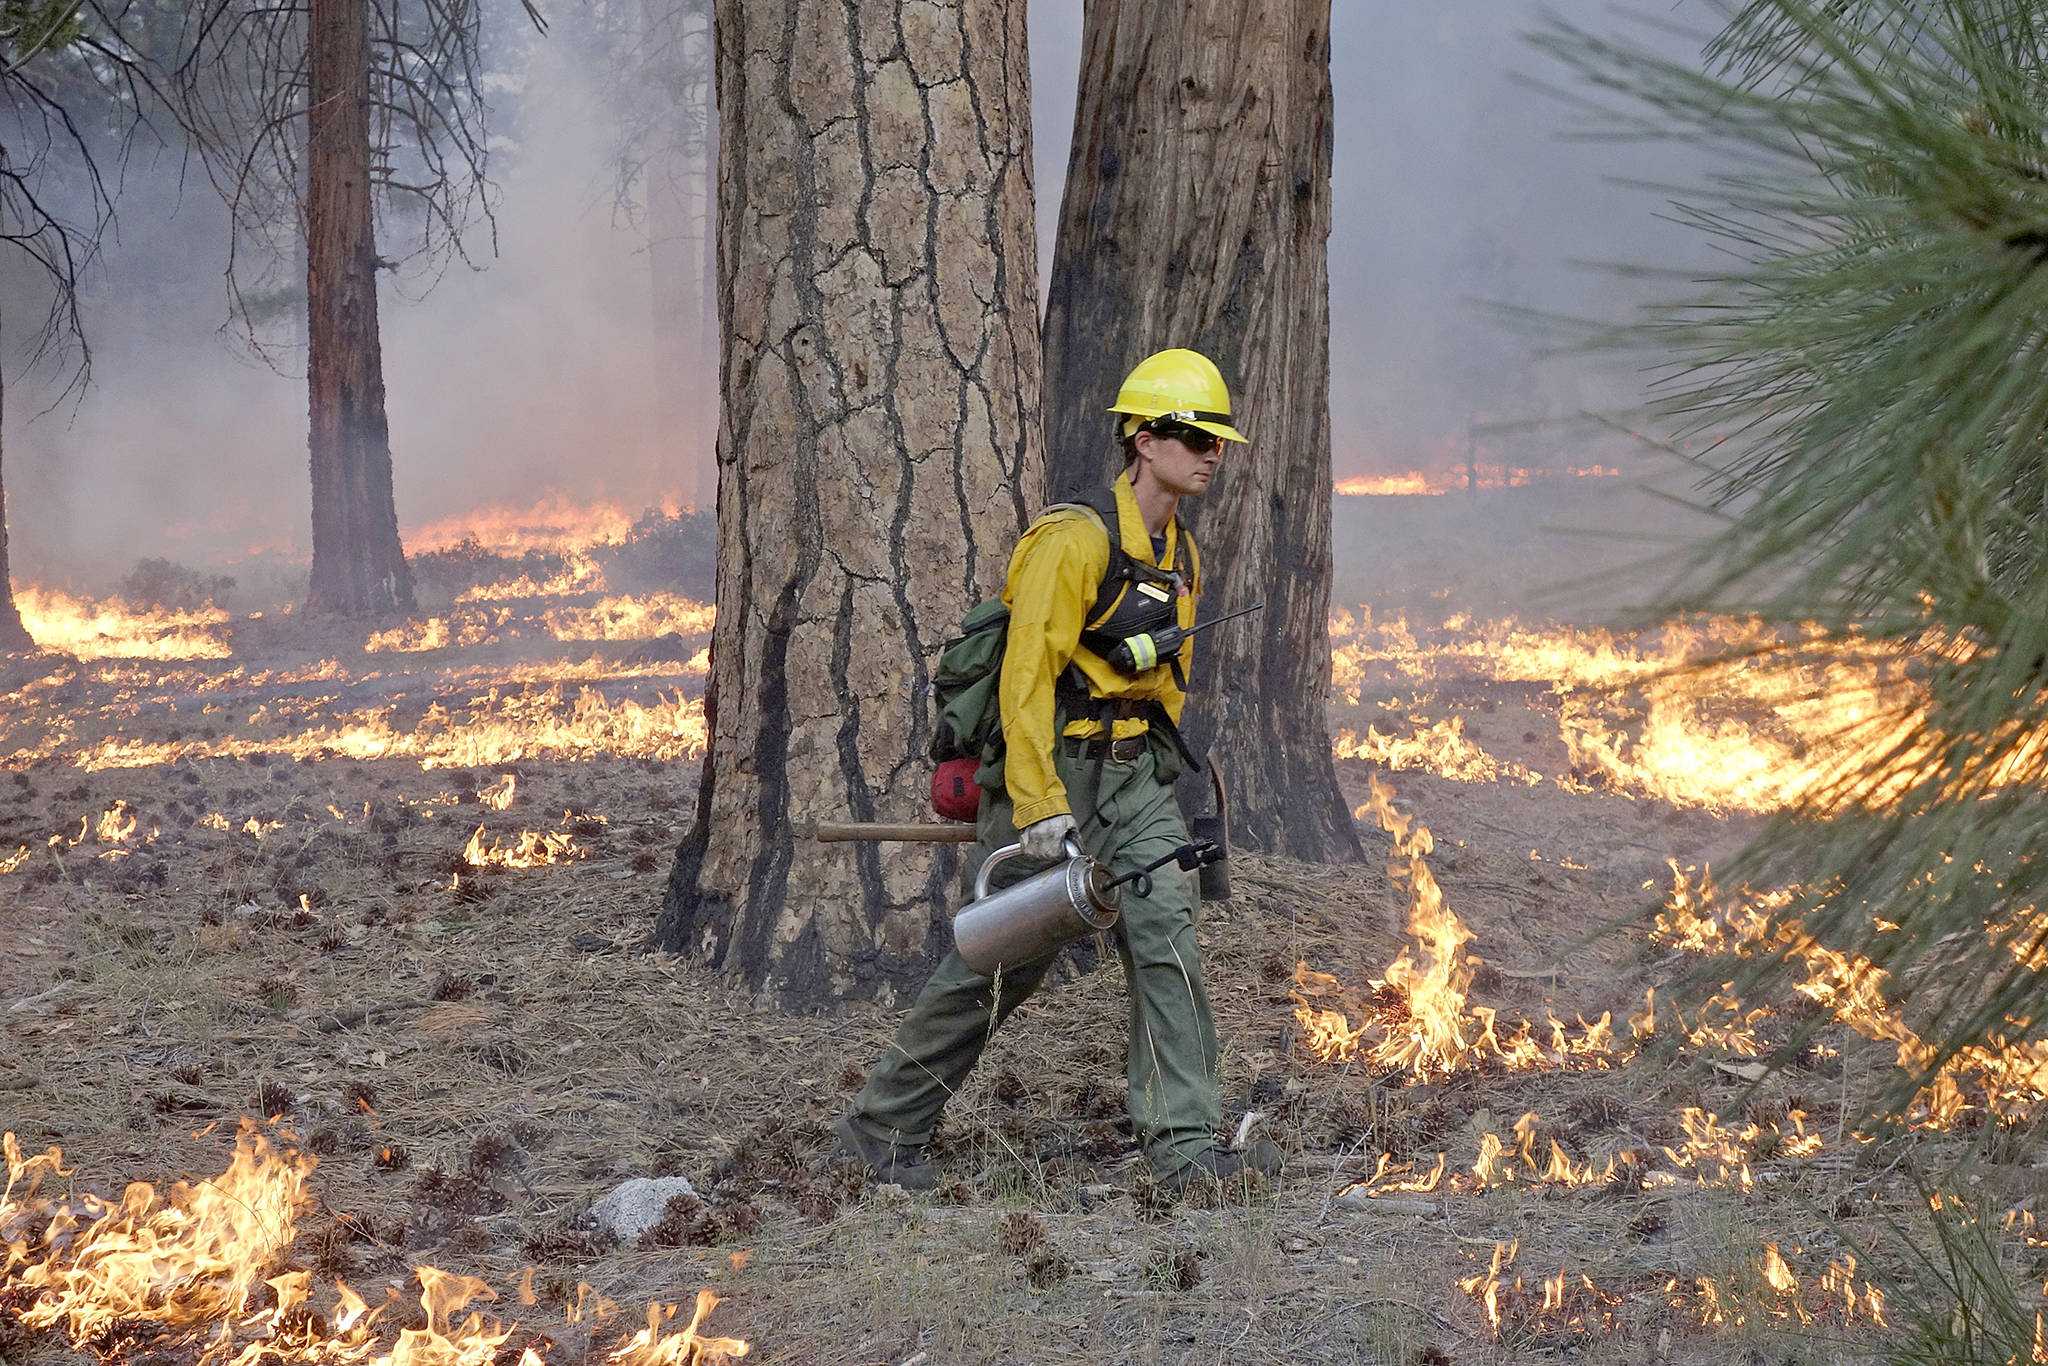 Hot, dry conditions will increase wildfire risk this weekend